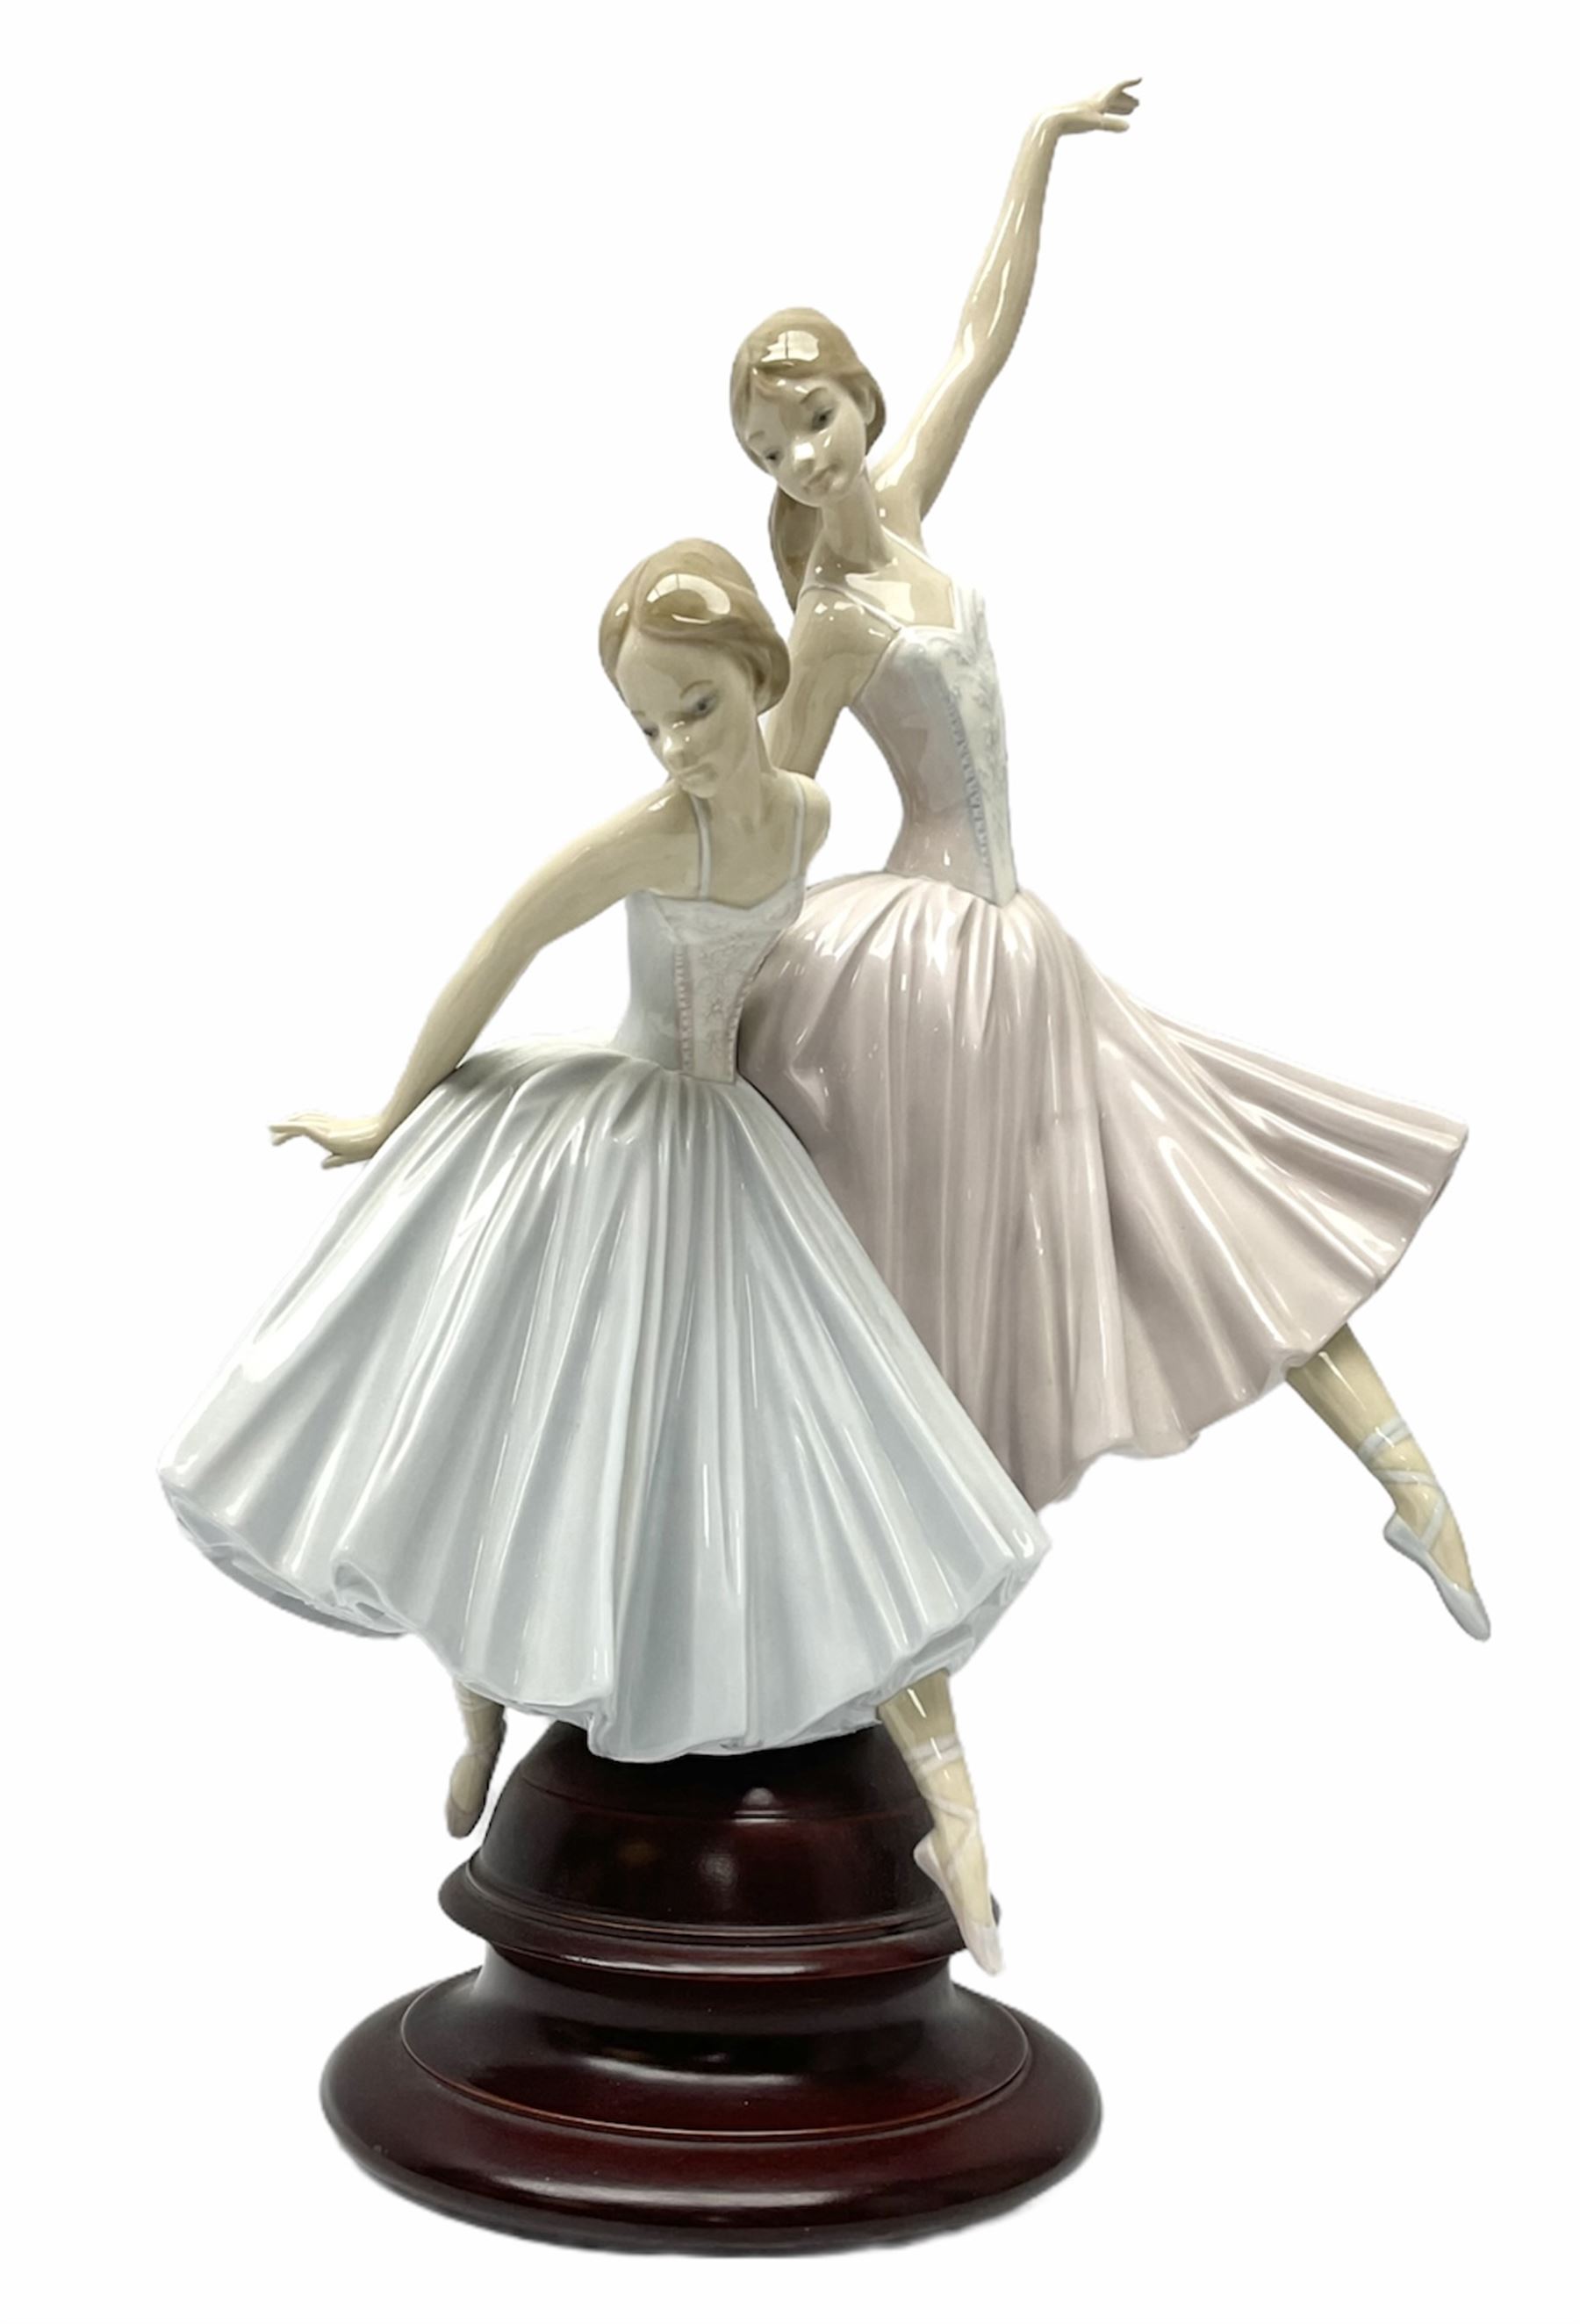 Lladro figure group, 'Merry Ballet', modelled as two ballerinas in